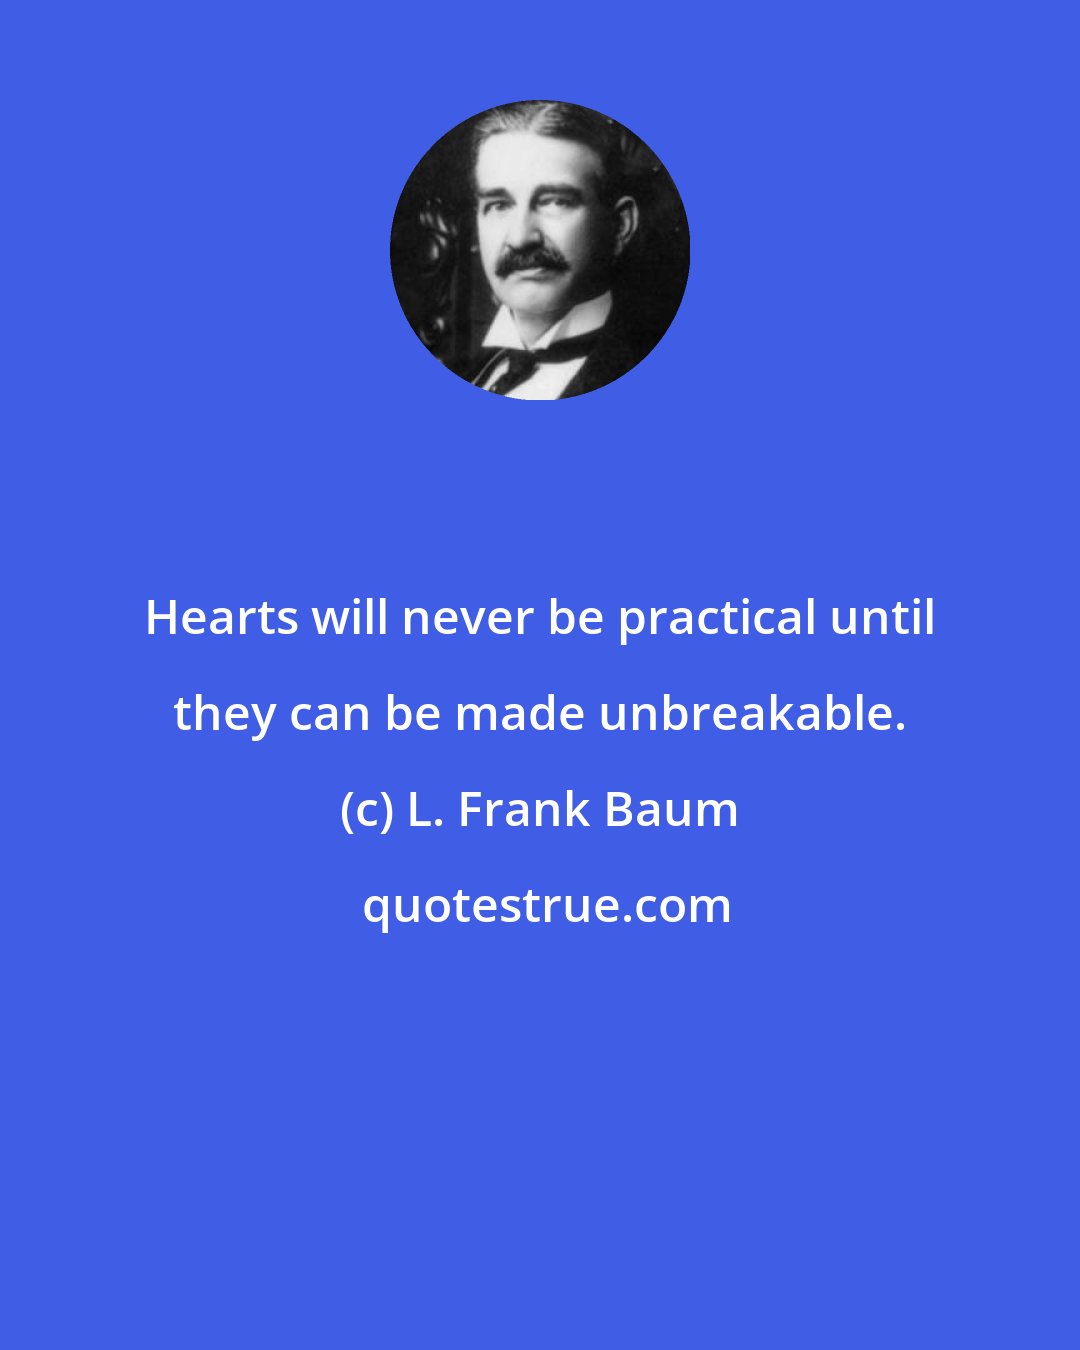 L. Frank Baum: Hearts will never be practical until they can be made unbreakable.